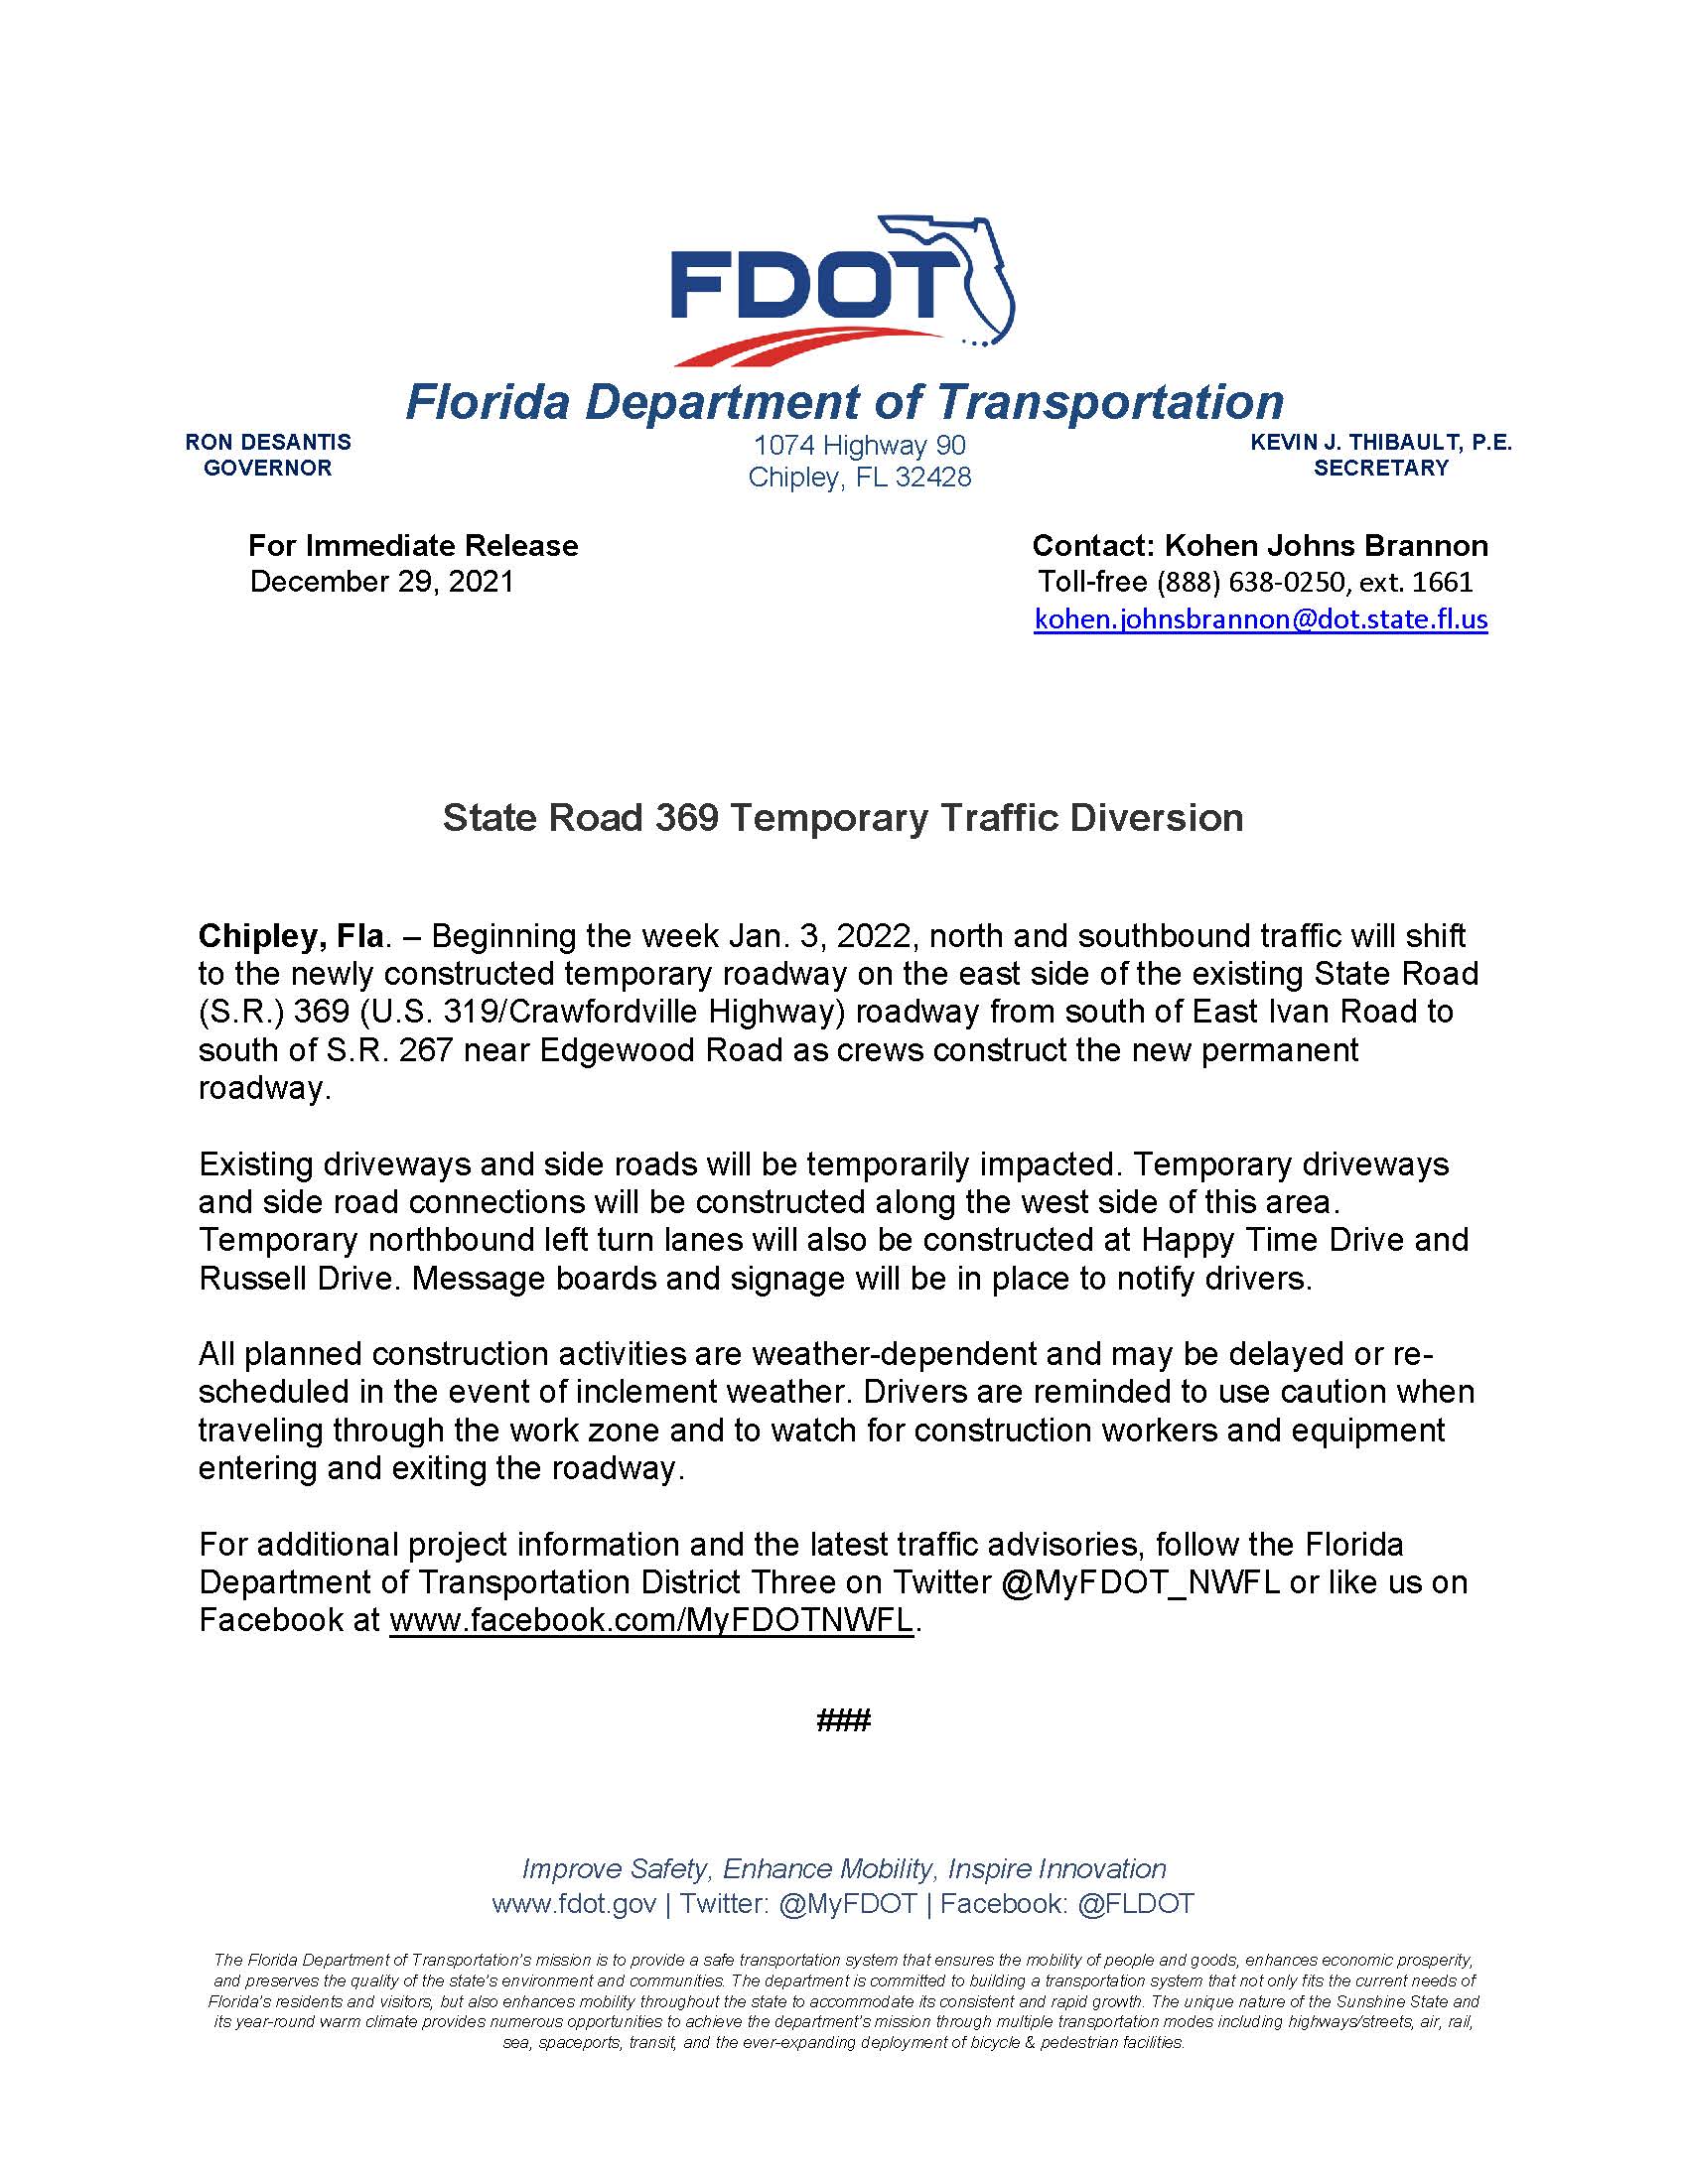 State Road 369 Traffic Diversion January 2022 - FINAL